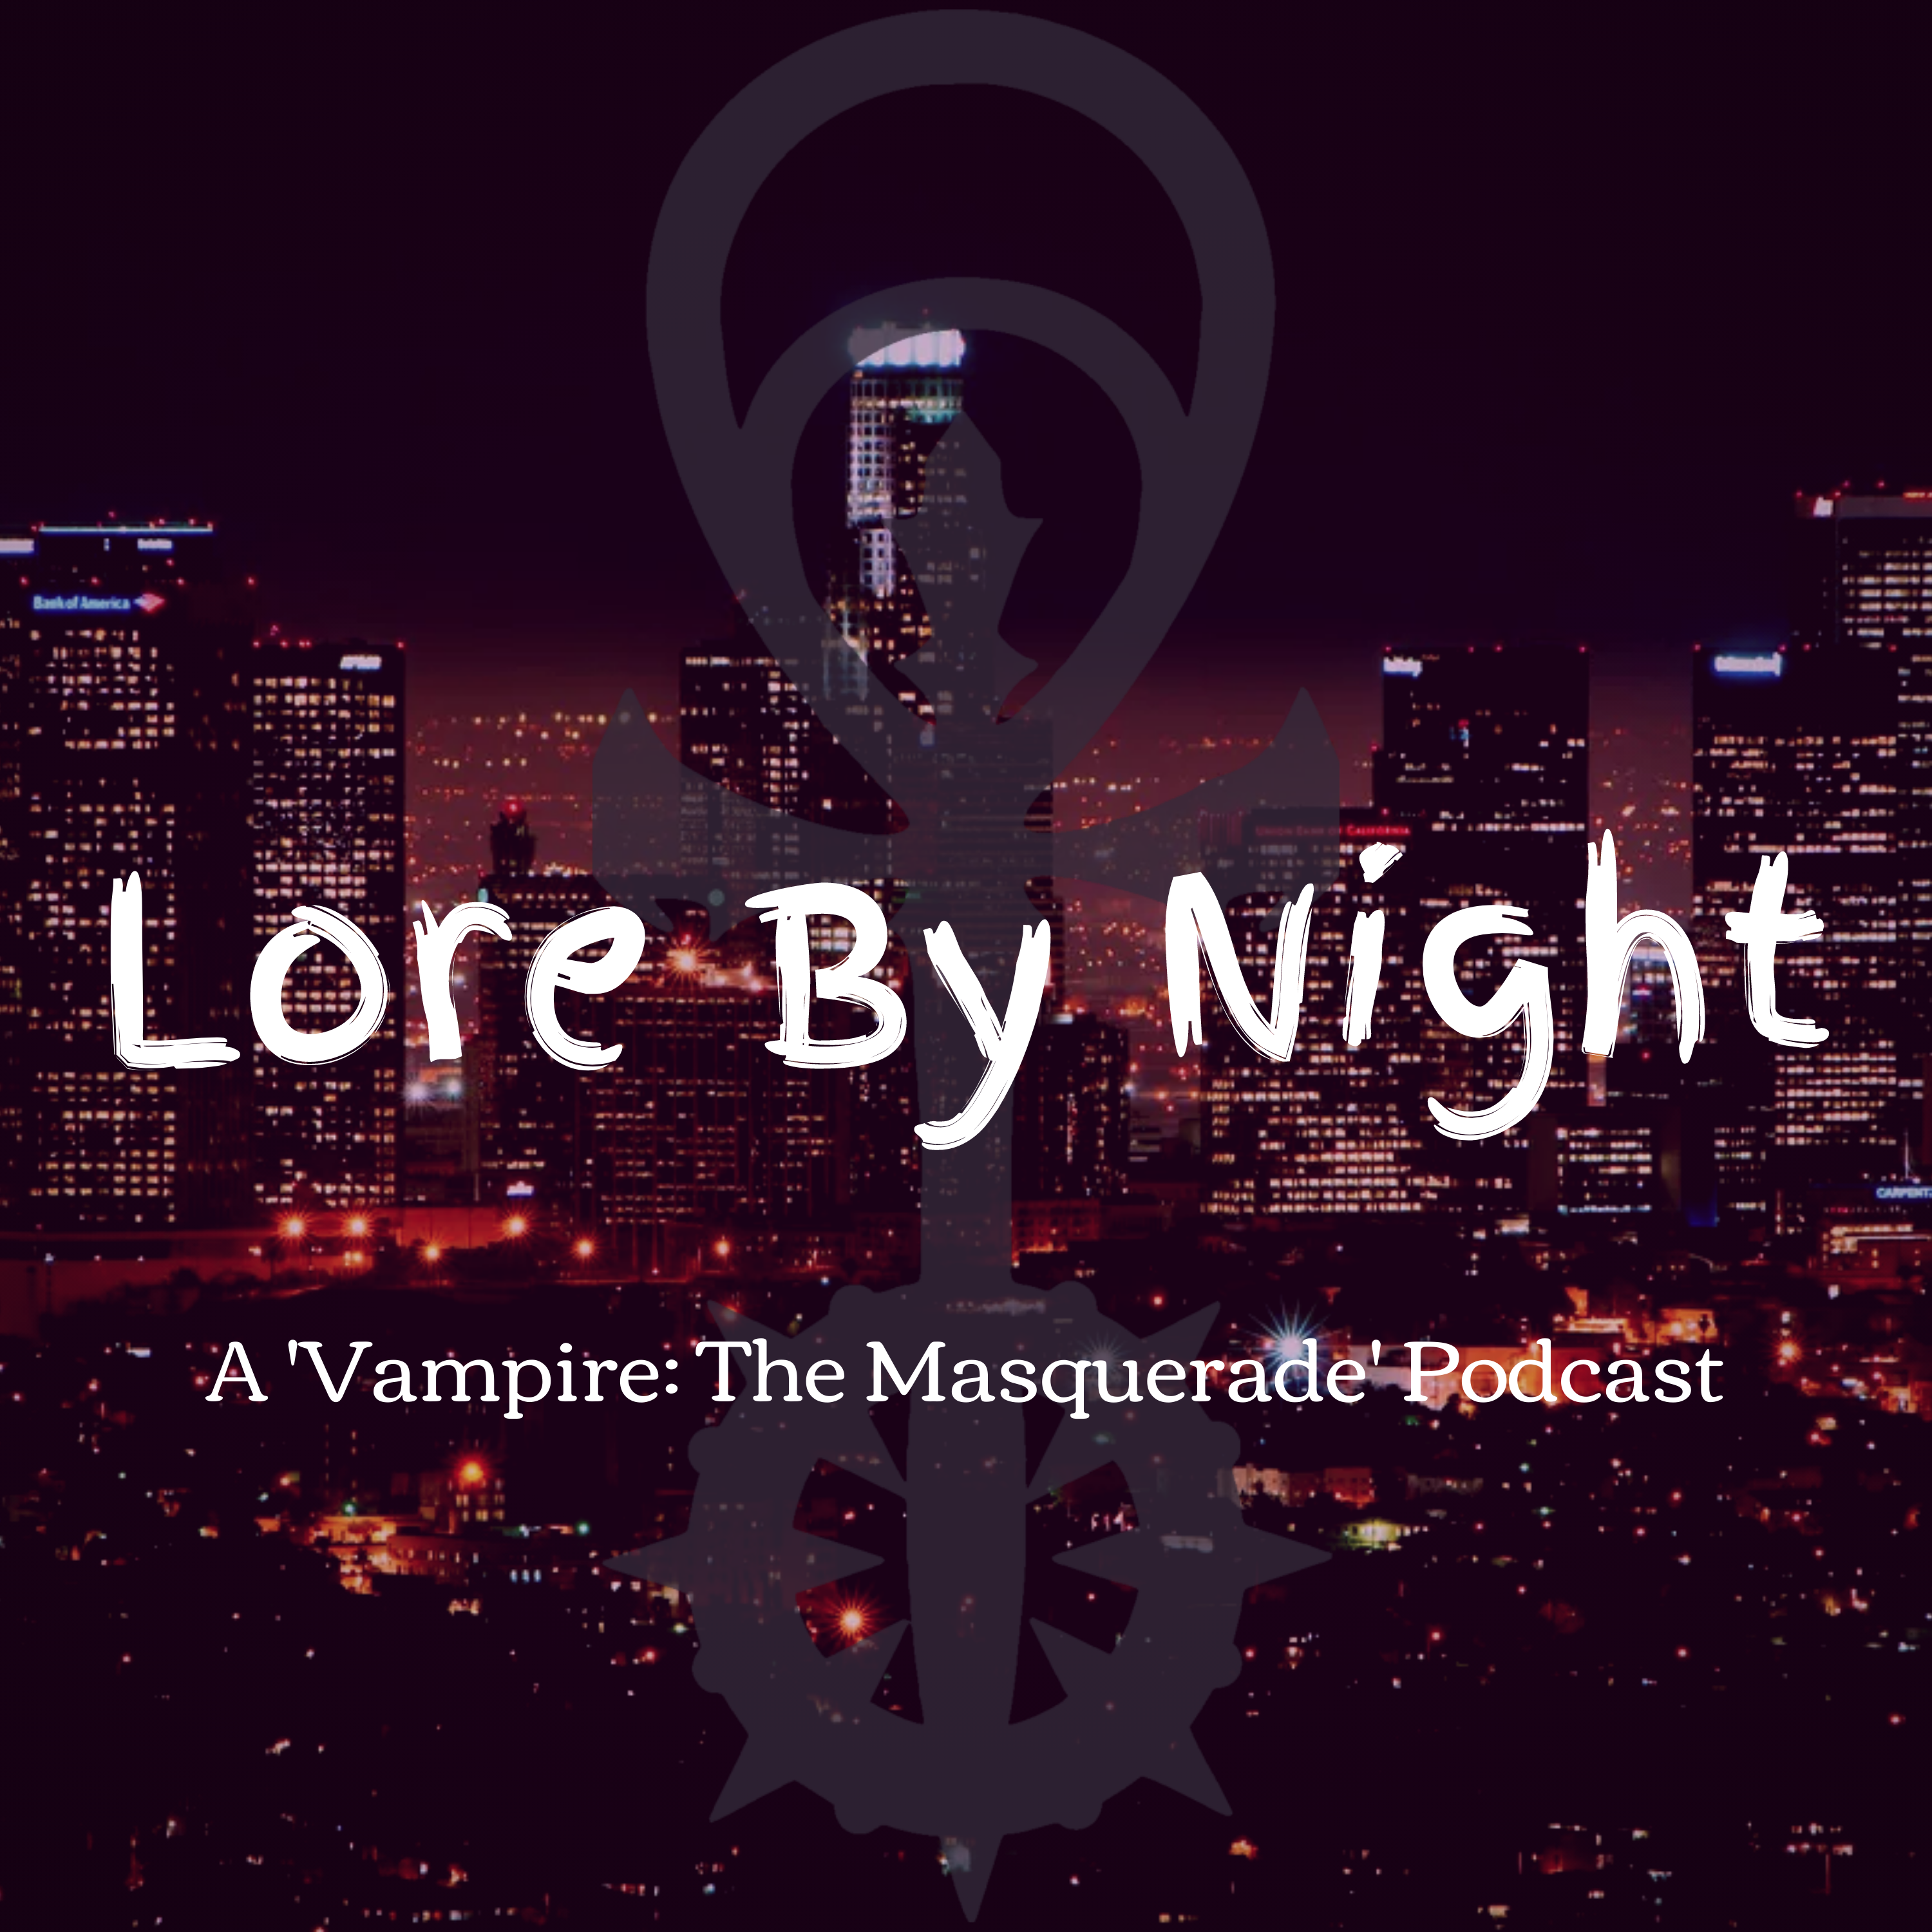 Night at the Library, Vampire: The Masquerade – Bloodlines Wiki